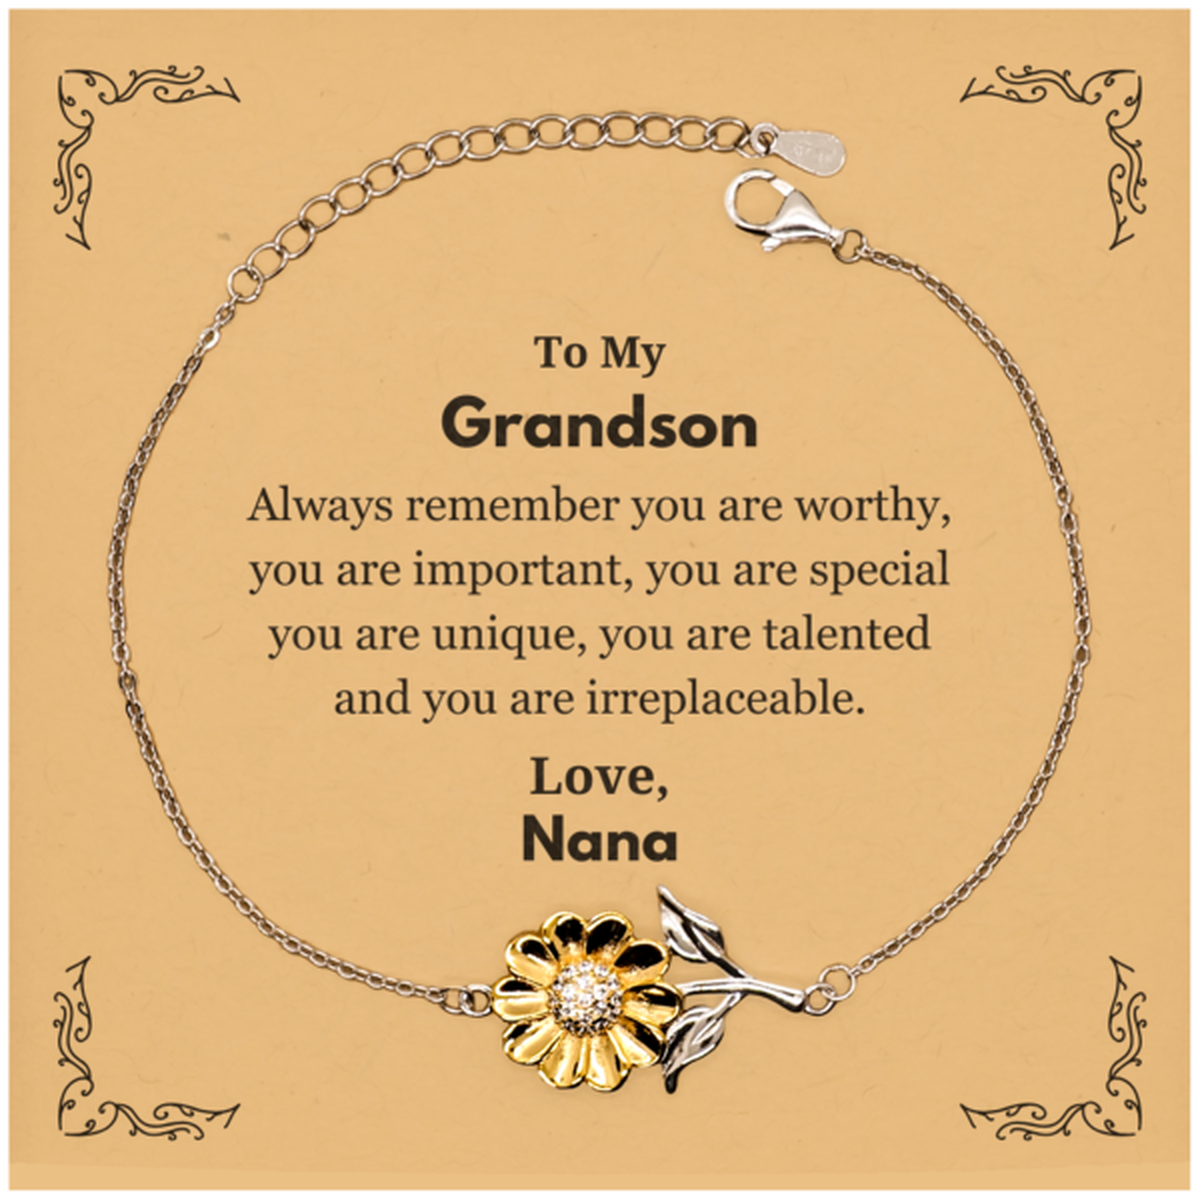 Grandson Birthday Gifts from Nana, Inspirational Sunflower Bracelet for Grandson Christmas Graduation Gifts for Grandson Always remember you are worthy, you are important. Love, Nana